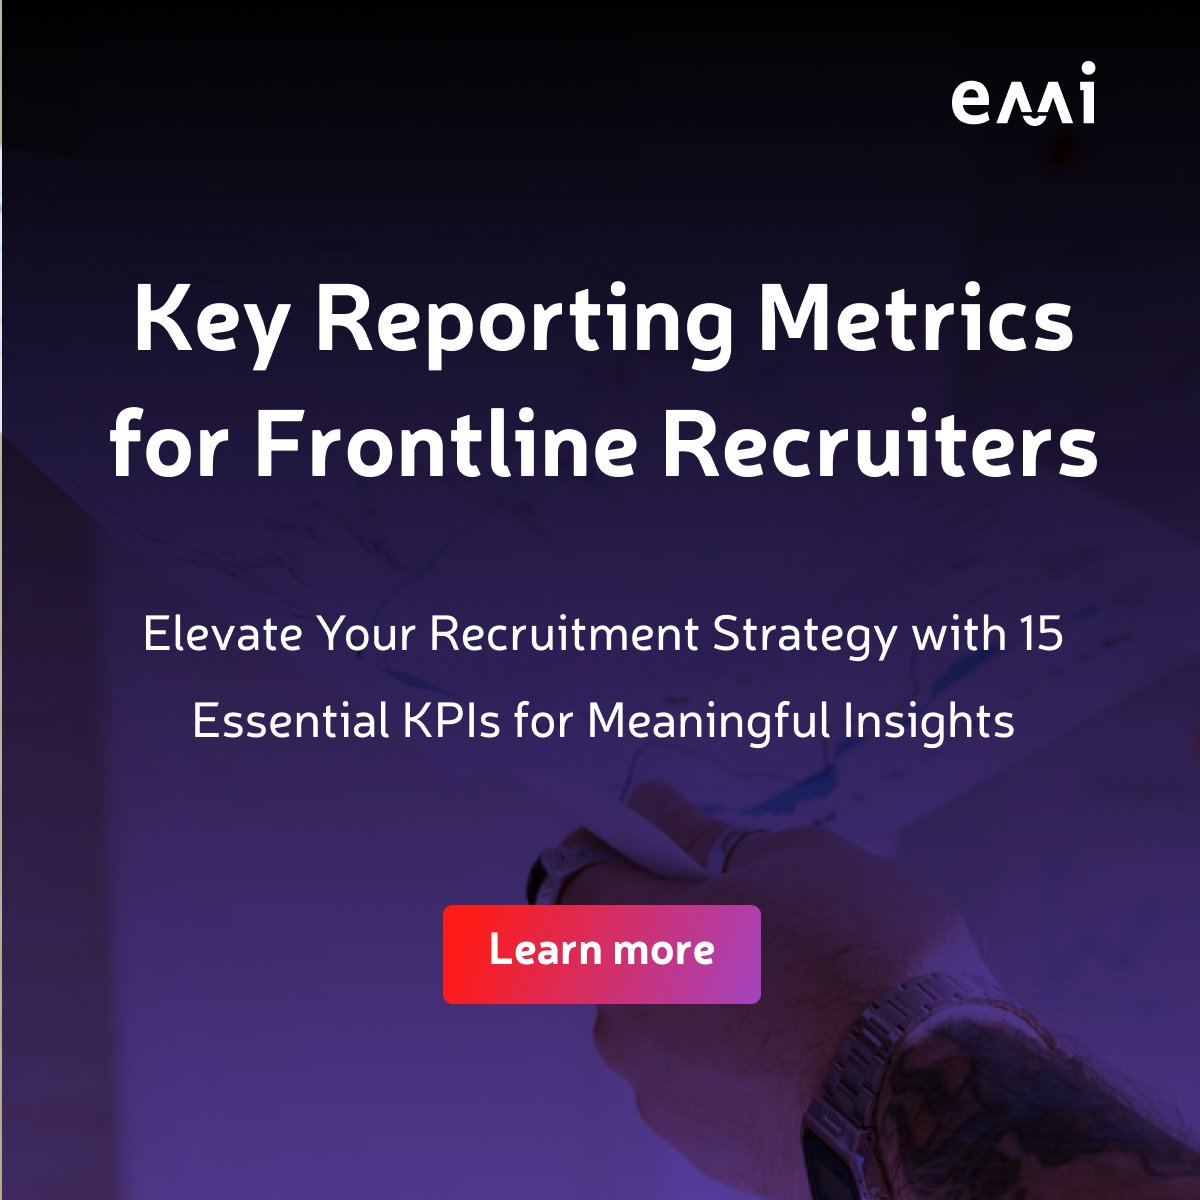 🚀 'Key Recruiting Metrics for Frontline Recruiters To Track' by @EmilabsHQ From reducing time to fill to enhancing candidate experience, gain the tools to refine your #RecruitmentStrategy. ecs.page.link/KTEYf #FrontlineHiring #RecruitmentMetrics #HRStrategy #Emi #Sponsored